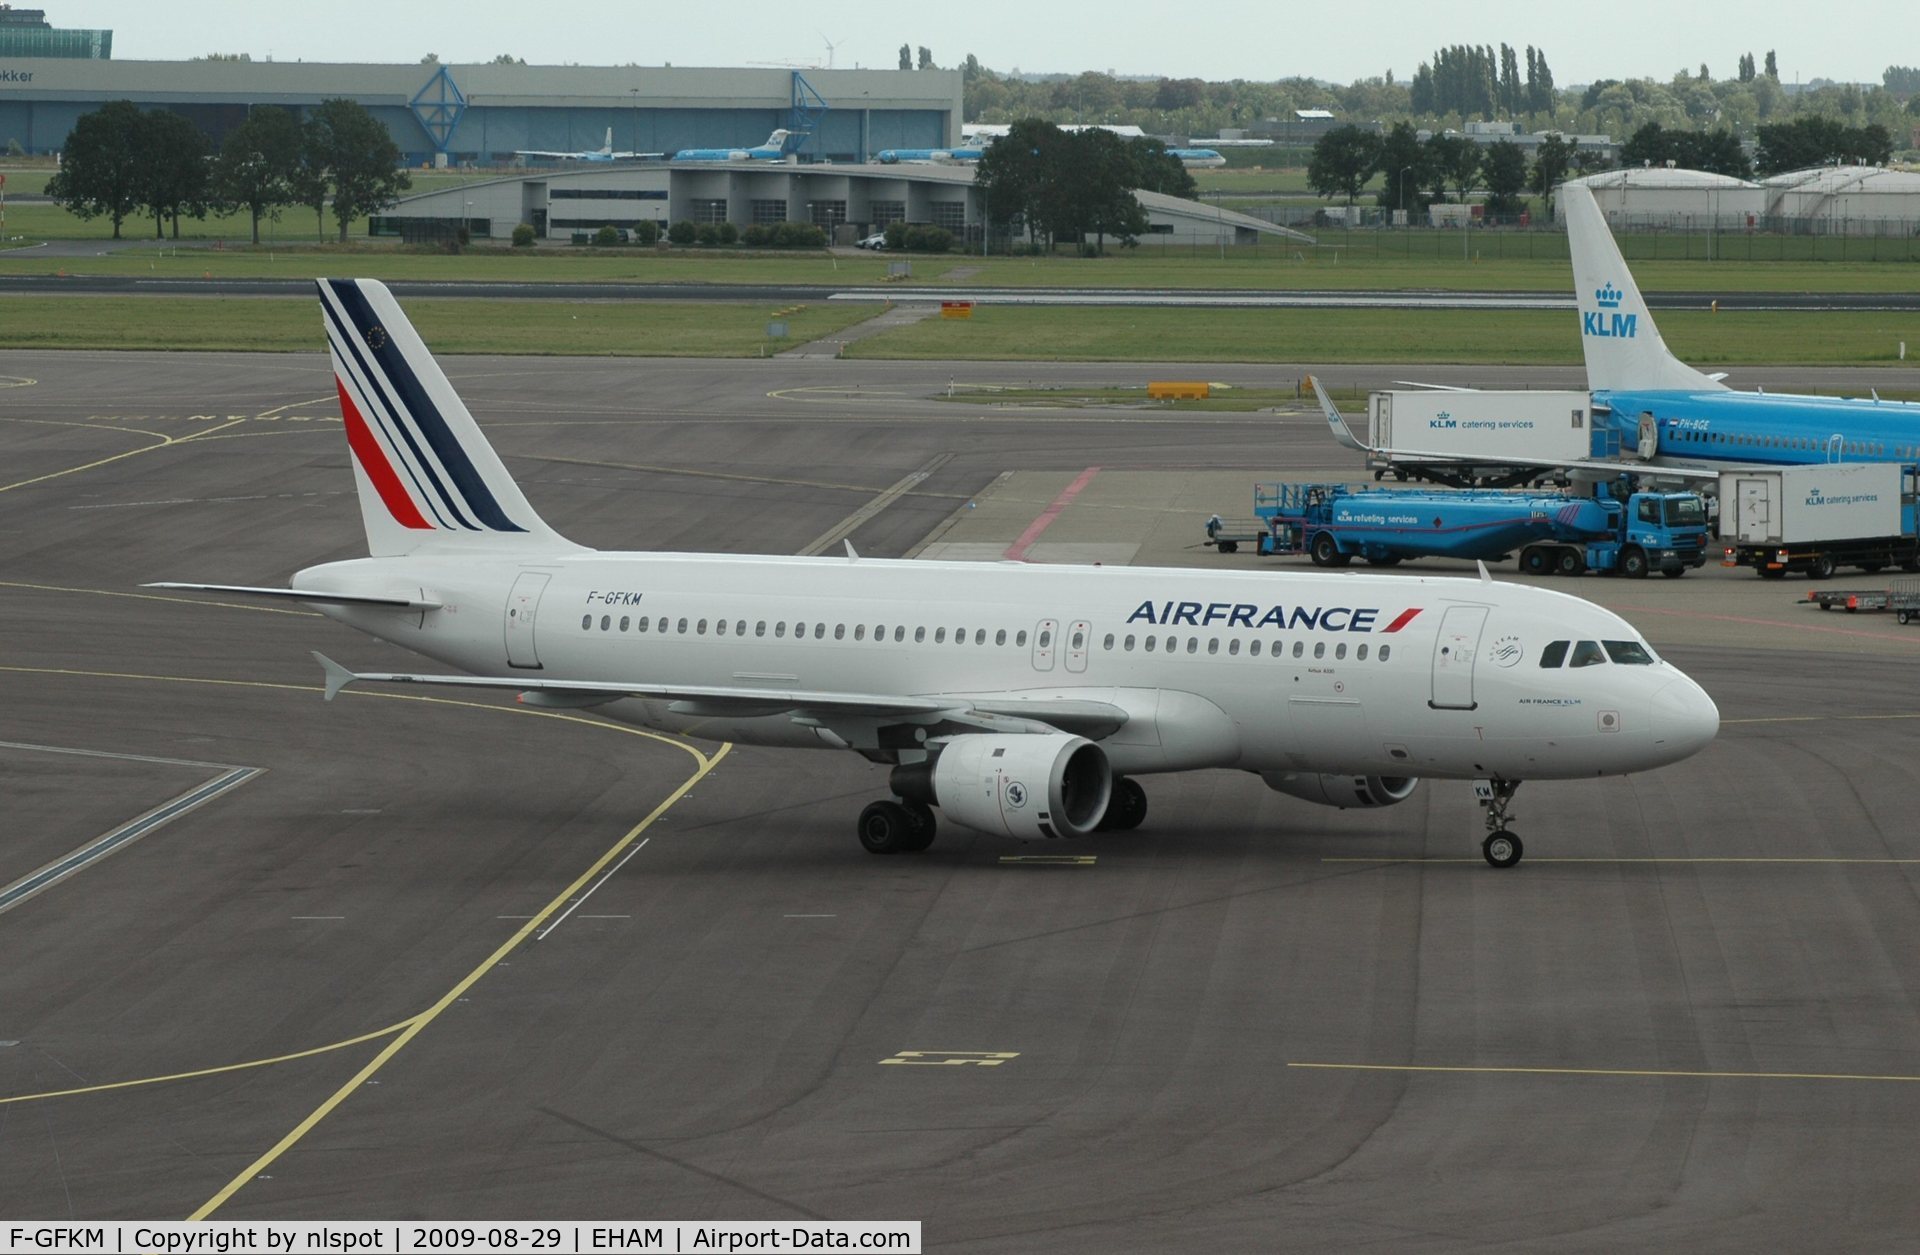 F-GFKM, 1990 Airbus A320-211 C/N 0102, in new Air France colours.